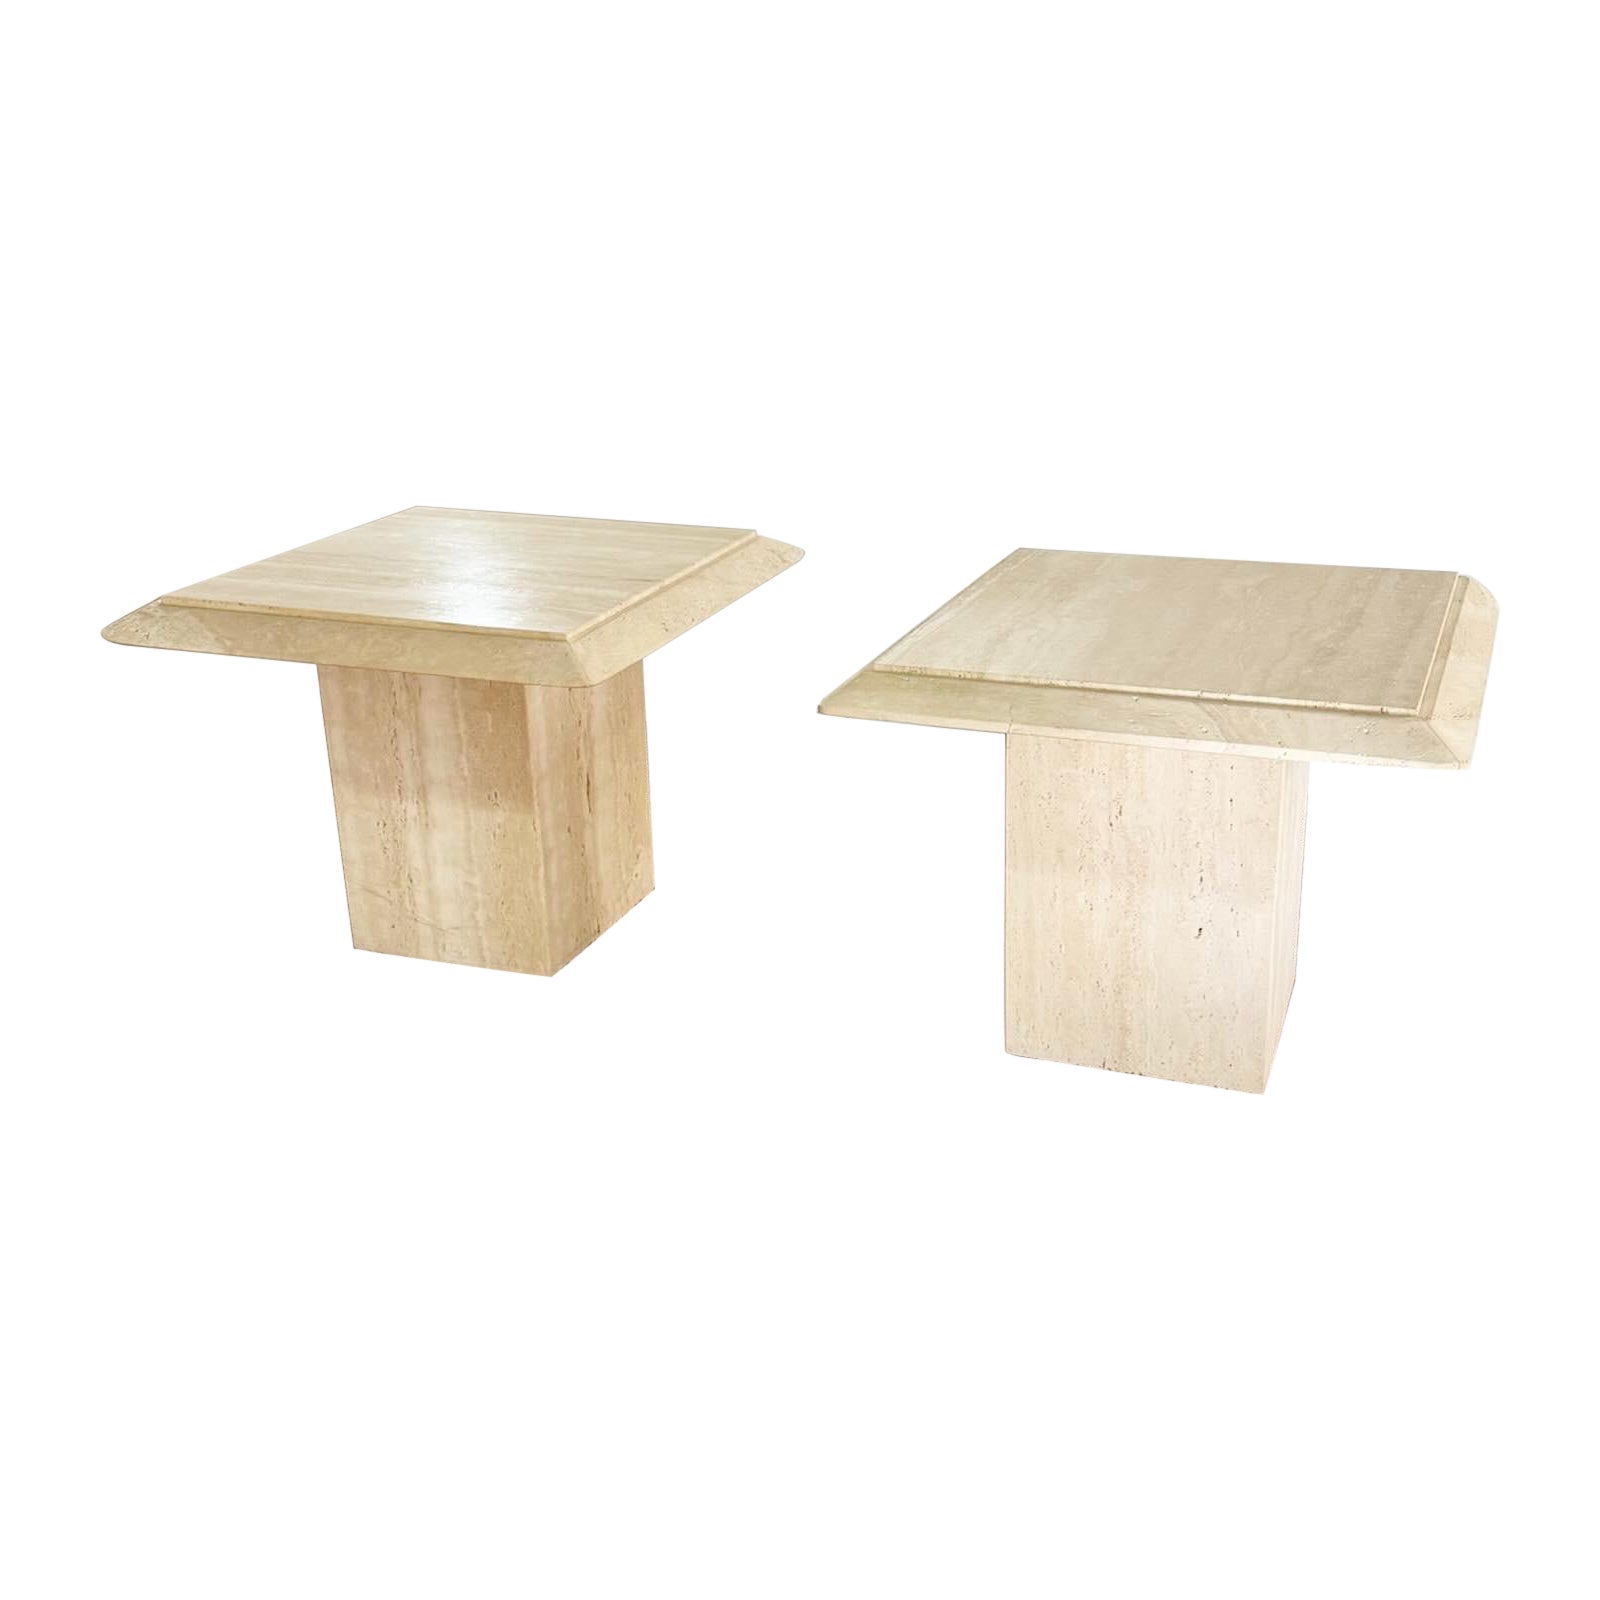 Italian Travertine Square Beveled Top Side Tables – a Pair For Sale